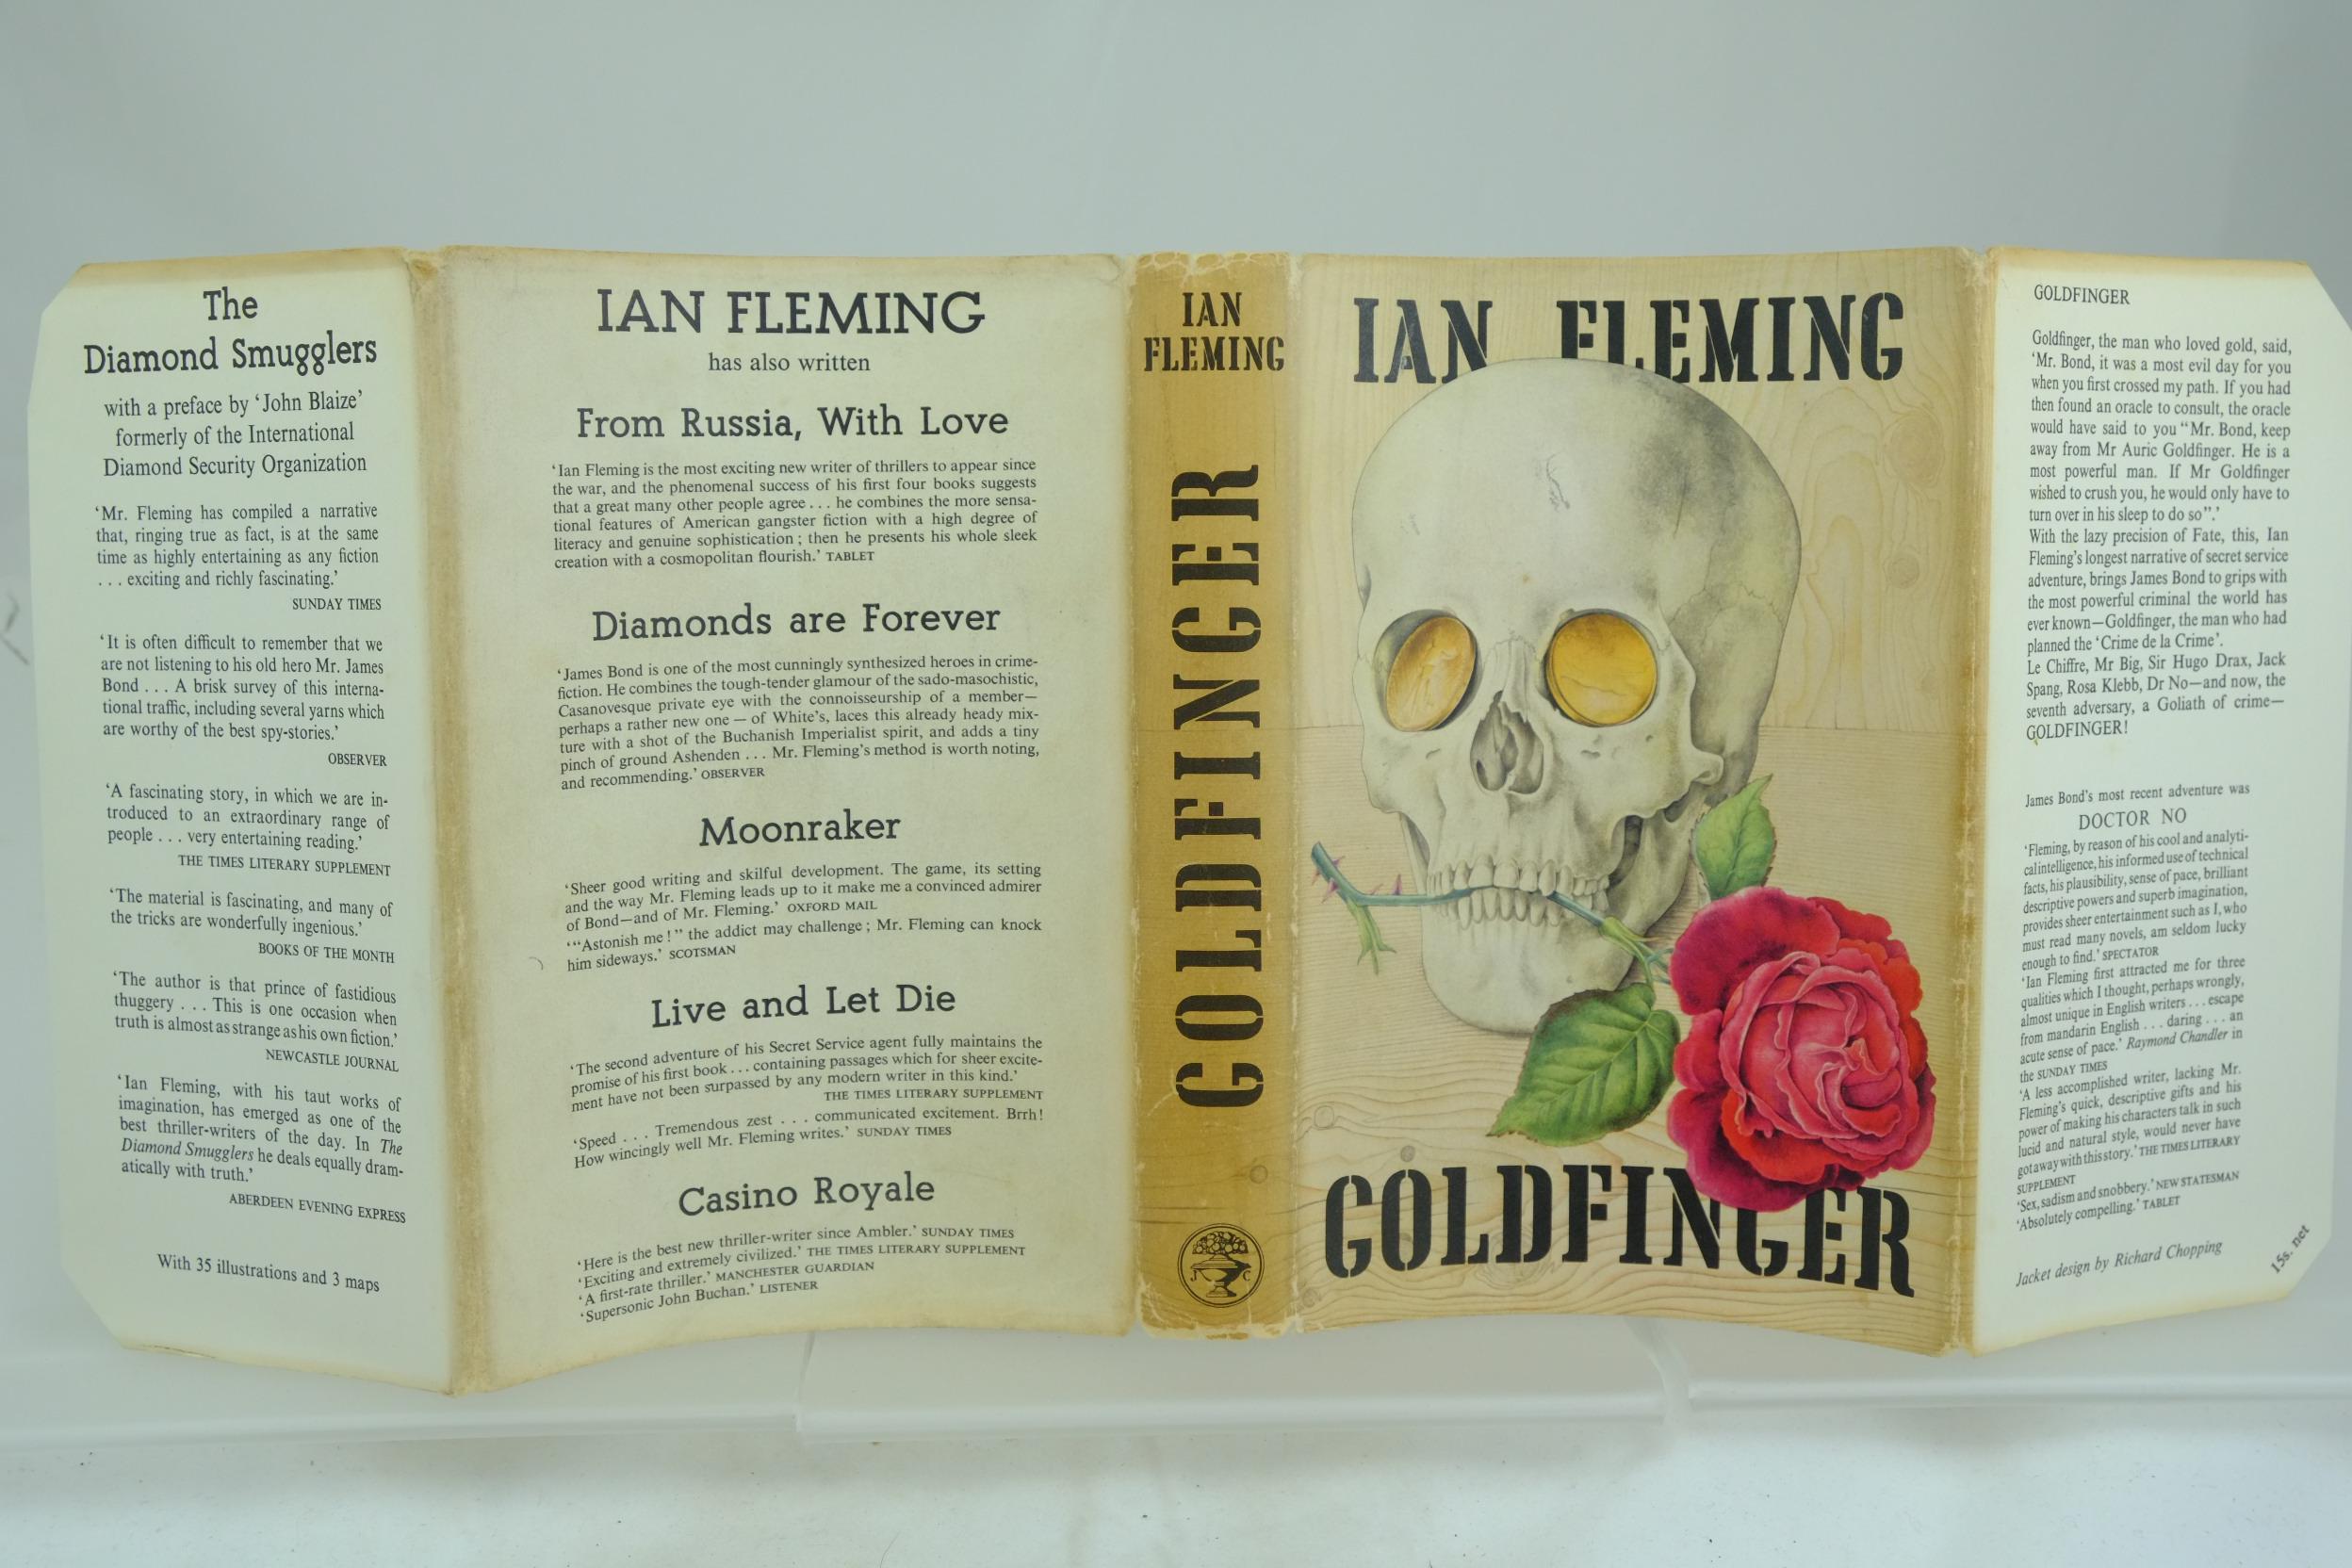 Goldfinger By Ian Fleming Very Good Hardcover 1959 1st Edition Rare And Antique Books Pbfa 